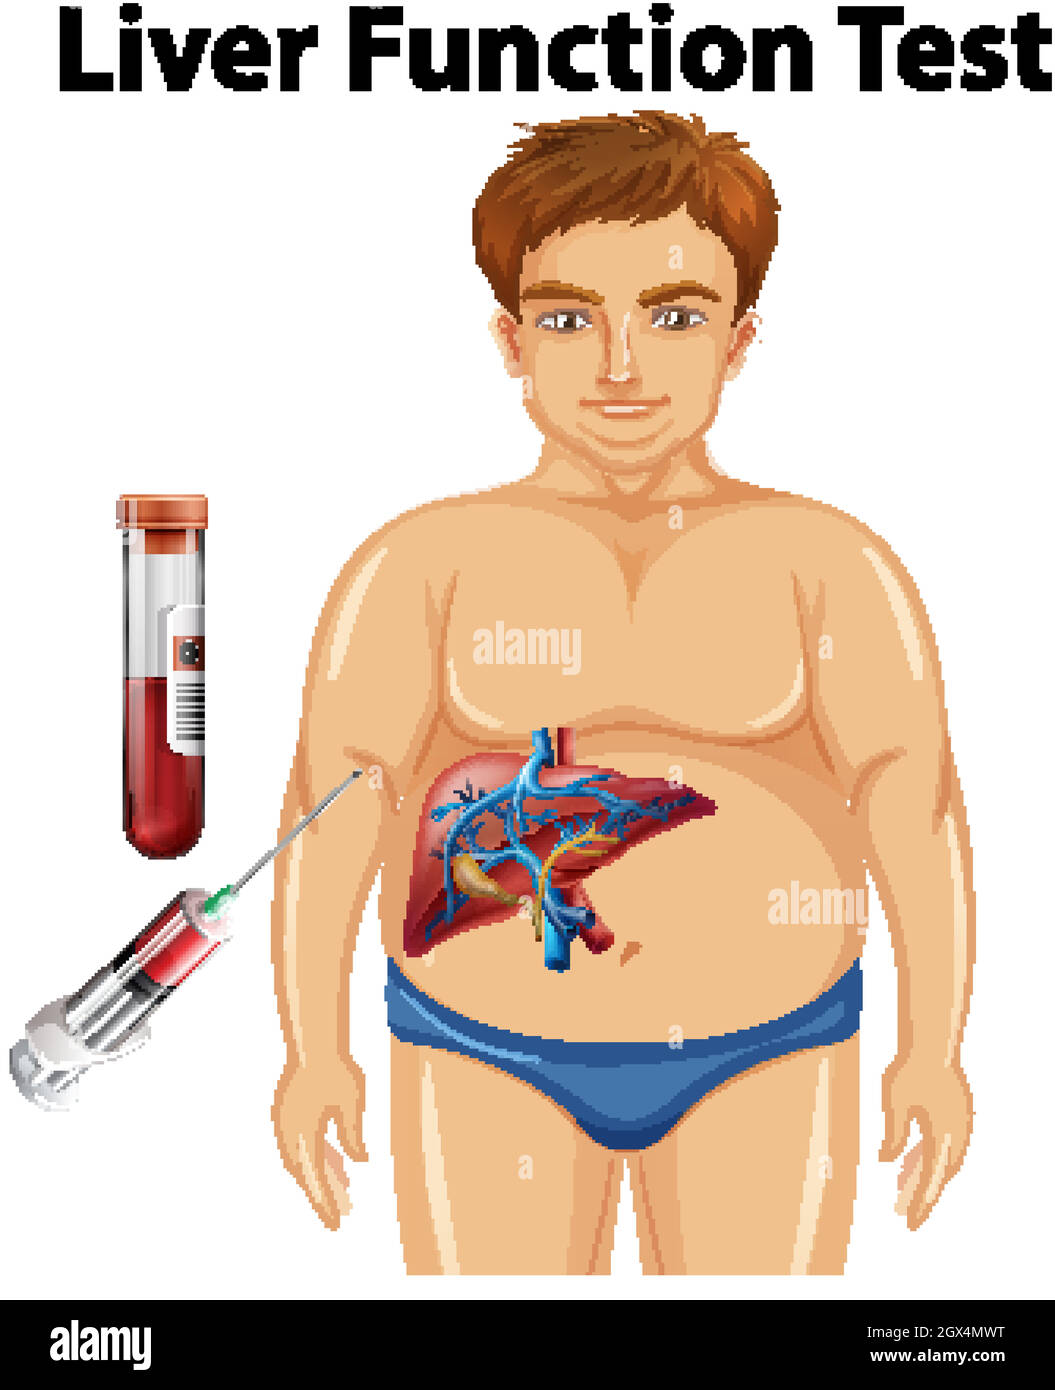 Set of liver function test with human body for education Stock Vector